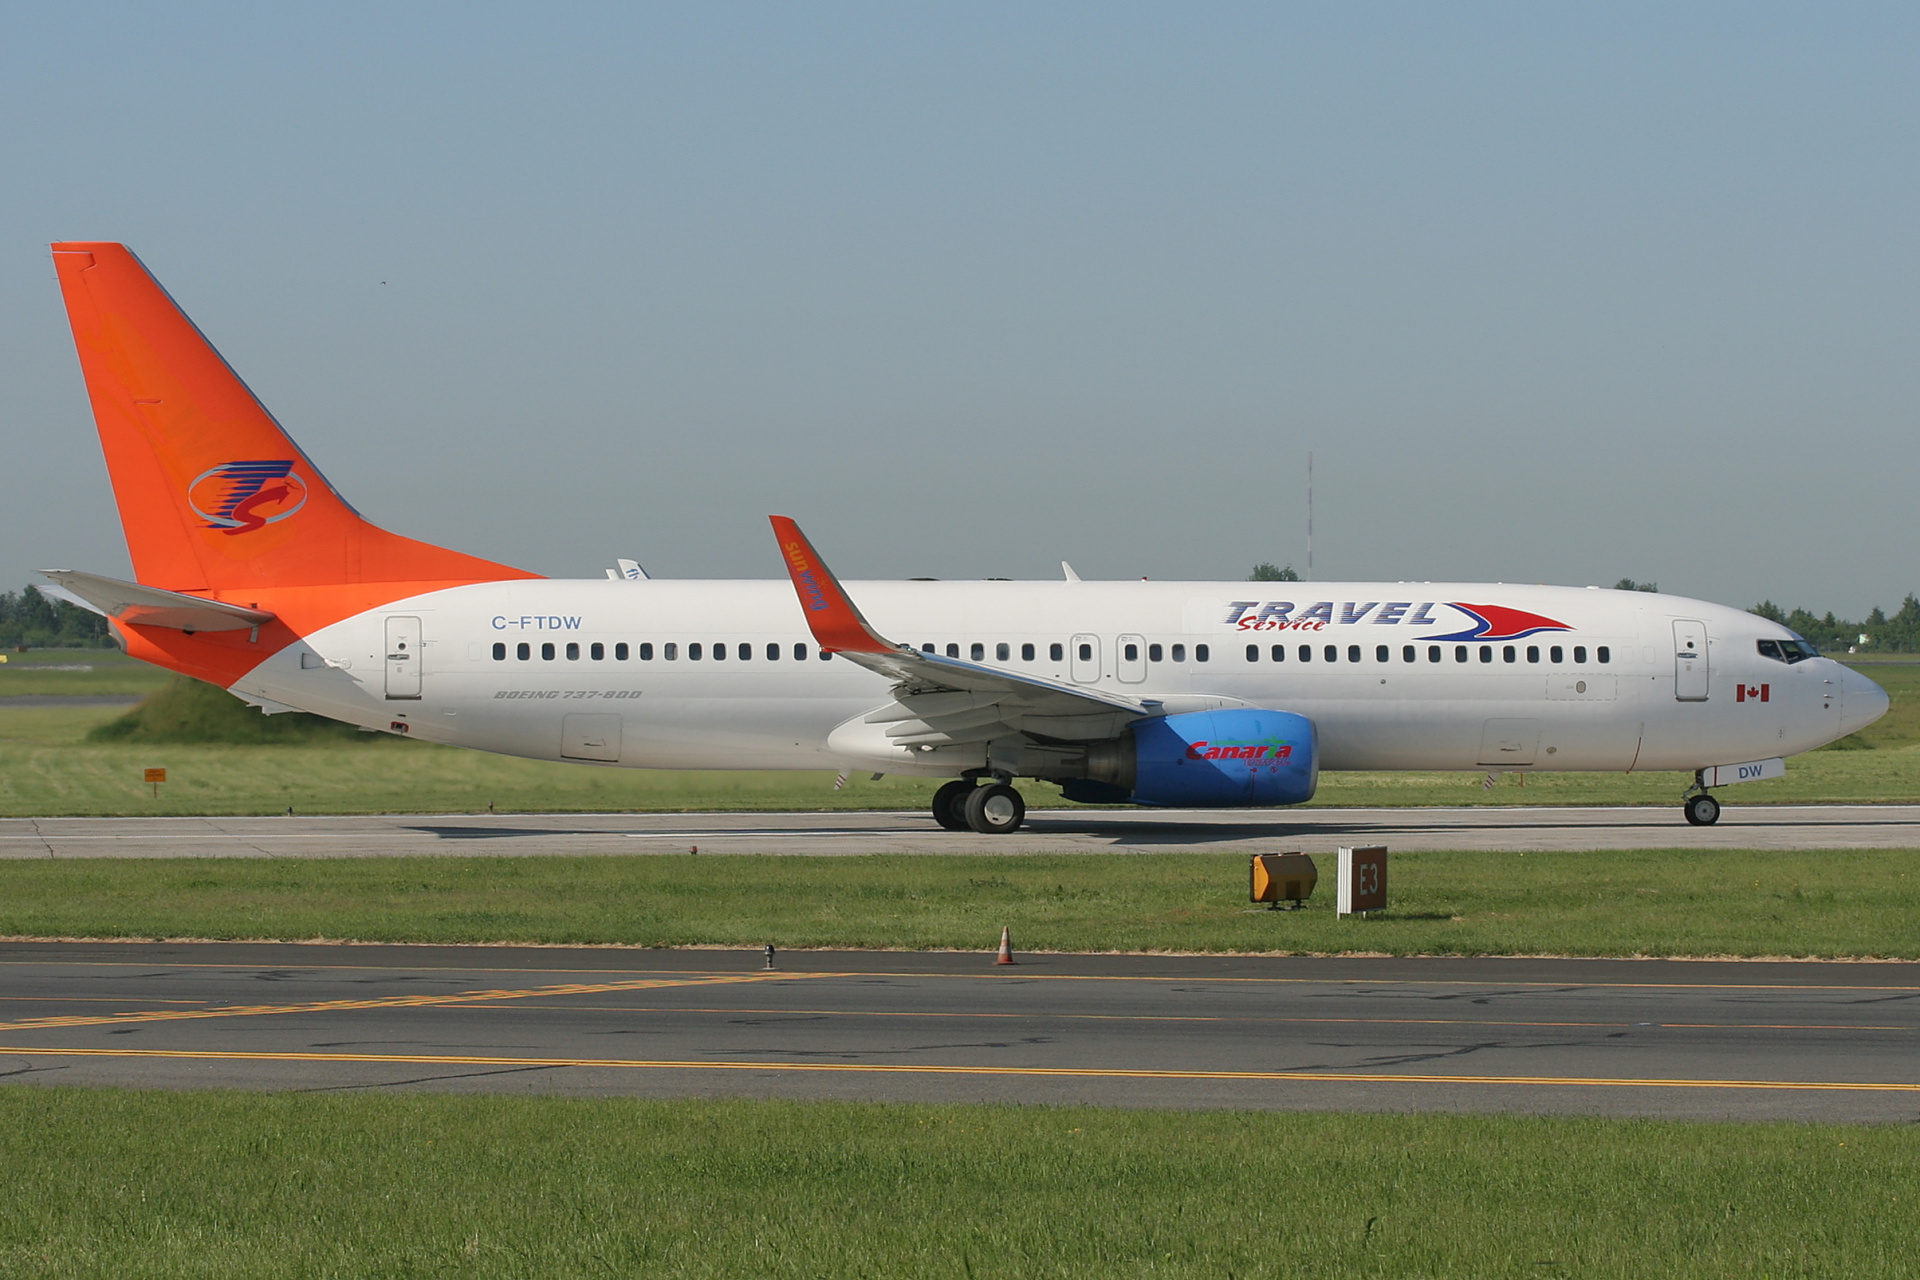 C-FTDW (Sunwing) (Aircraft » EPWA Spotting » Boeing 737-800 » Travel Service Airlines)